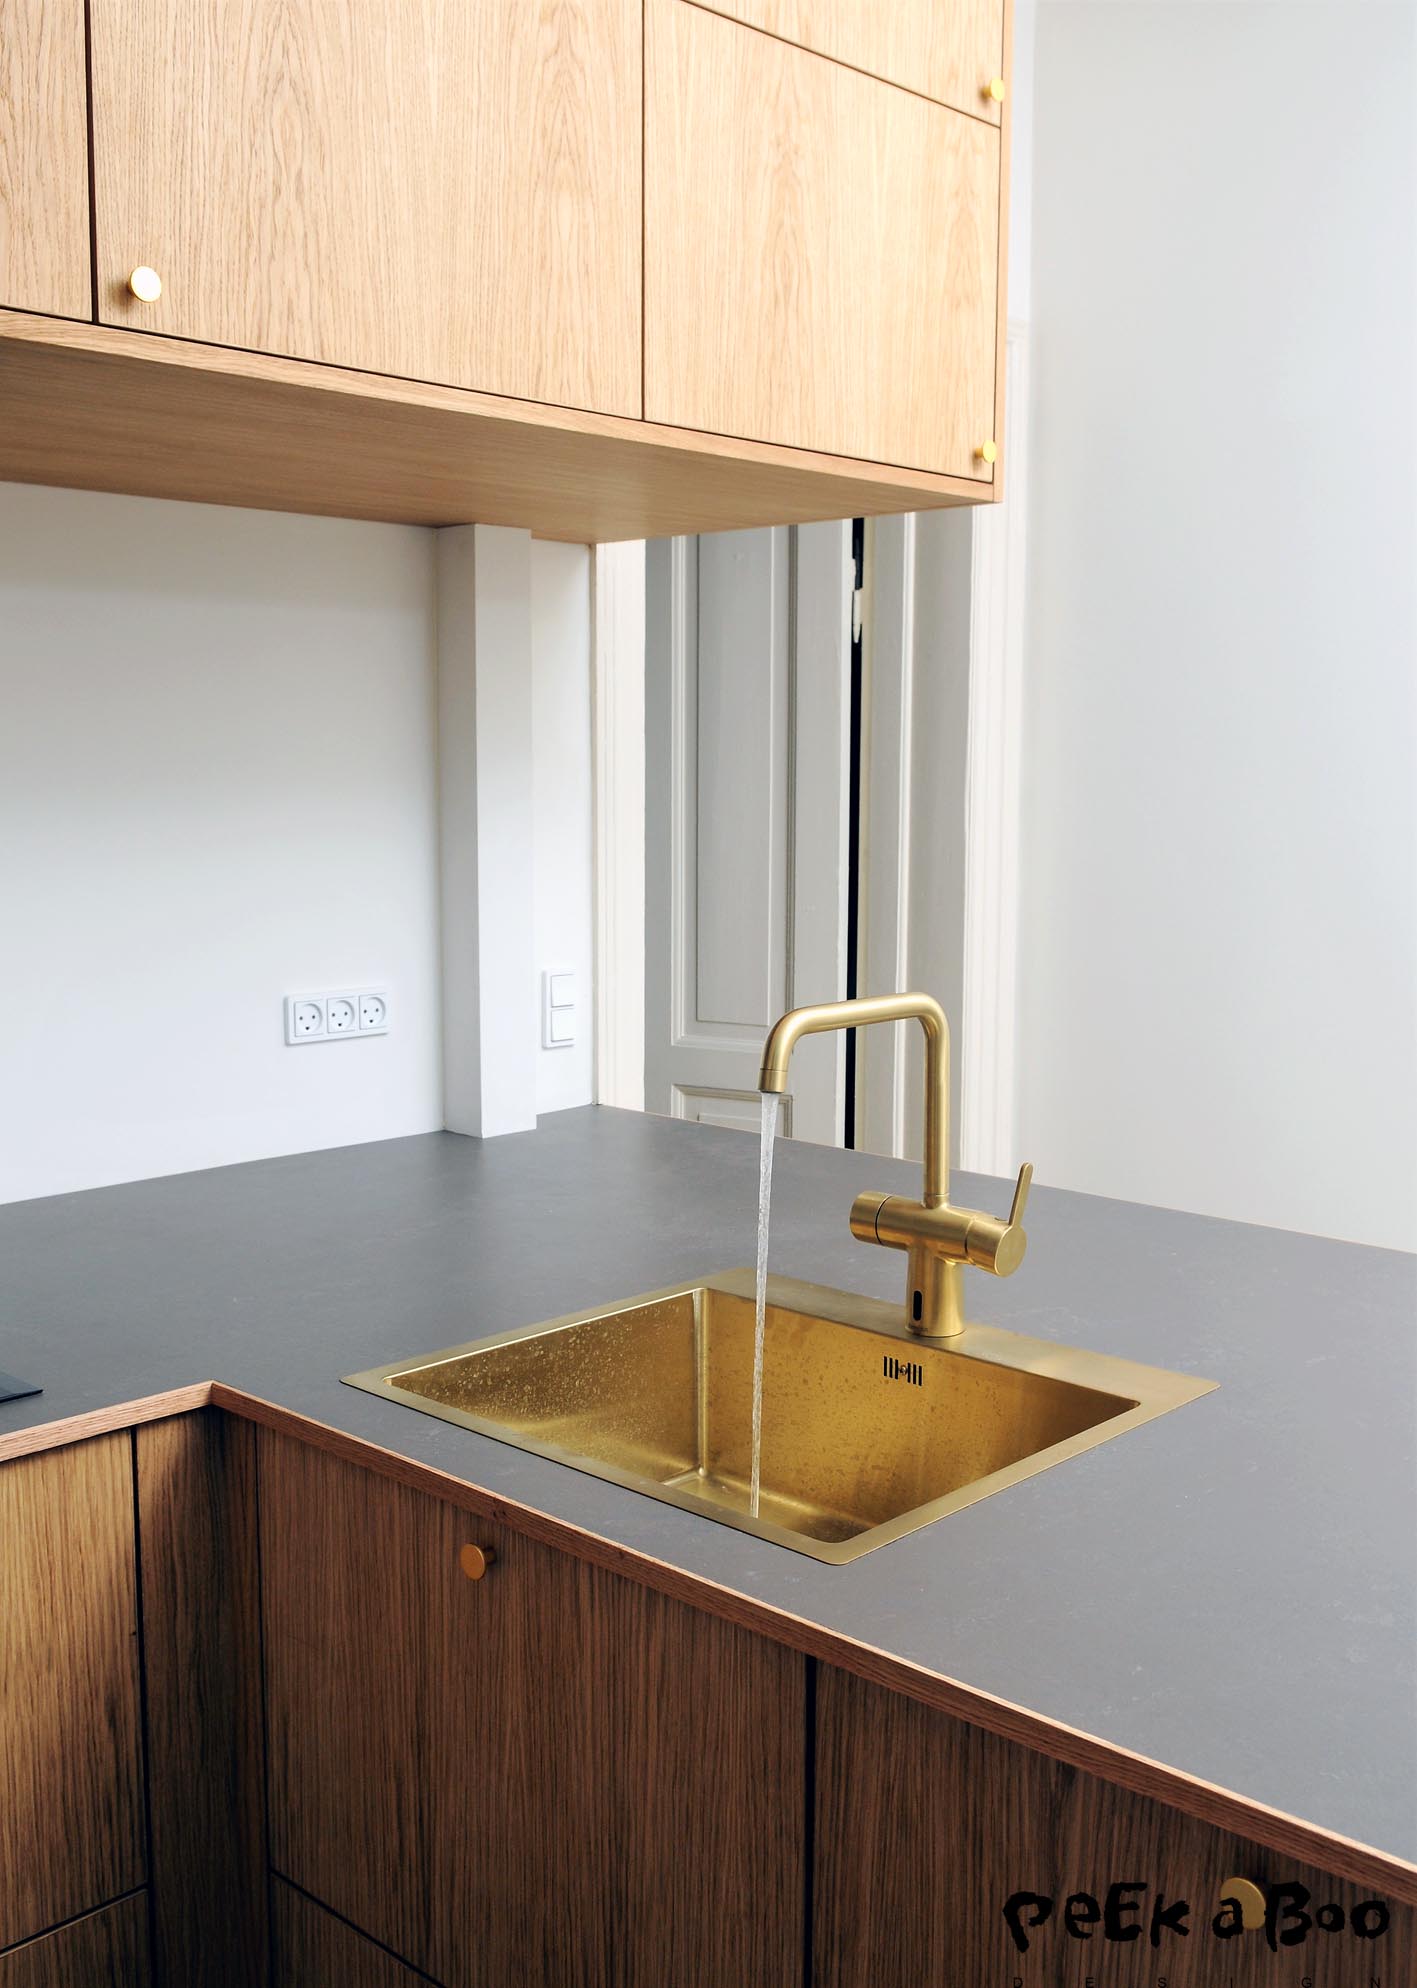 Deluxe zink and mixer tap both in brass. You can get the lavabo zink and the Damixa silhuette tap on billigvvs.dk